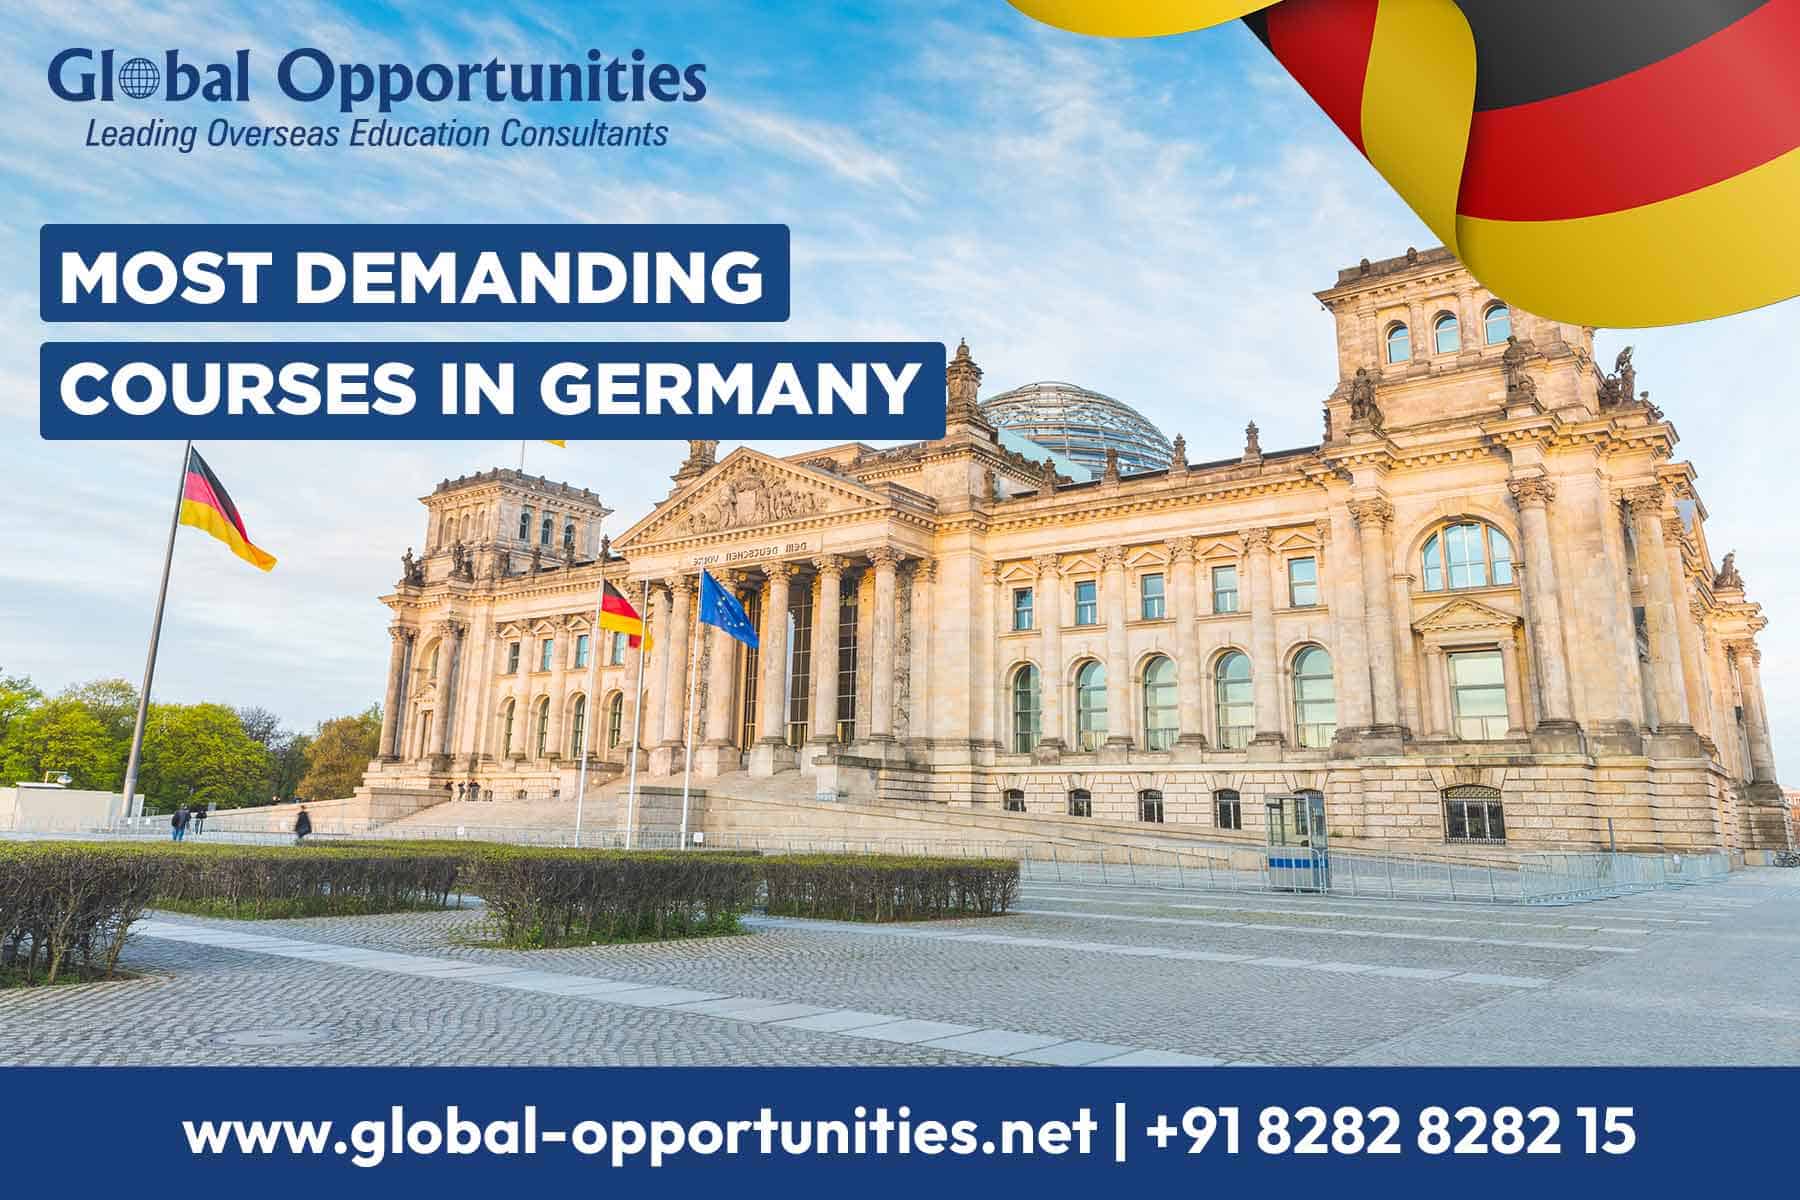 Most Demanding Courses in Germany